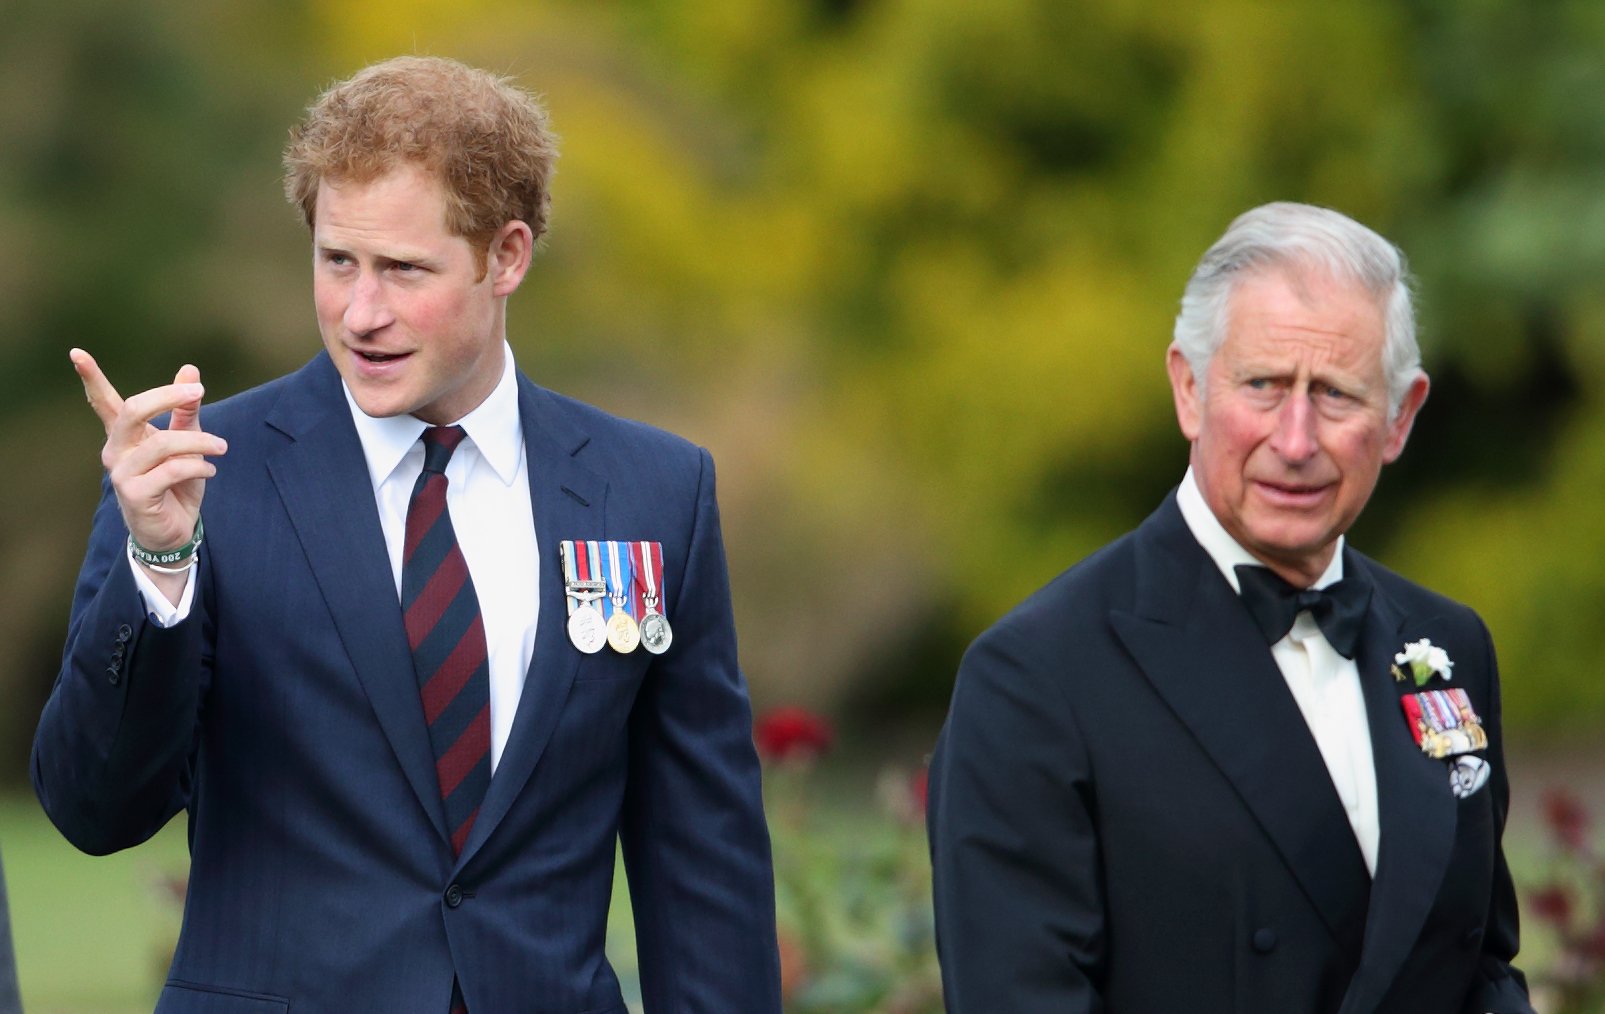 Prince Harry and Prince Charles, Prince of Wales attend the Gurkha 200 Pageant at the Royal Hospital Chelsea on June 9, 2015 in London, England | Photo: Getty Images